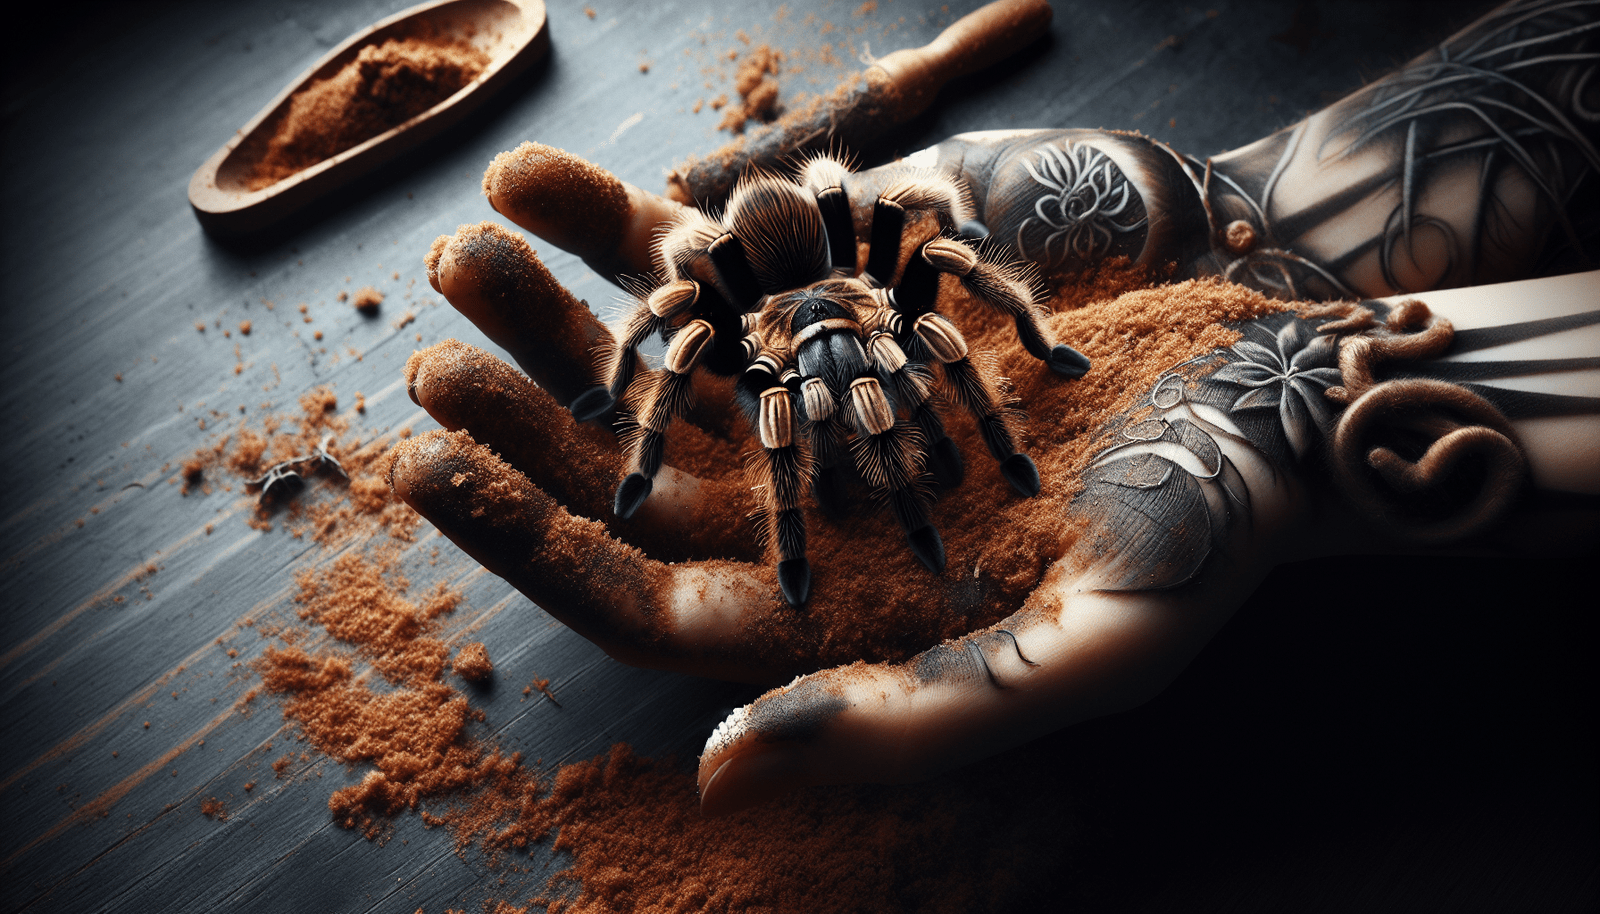 What Are The Most Sought-after Tarantula Species For Breeding In The Pet Trade?